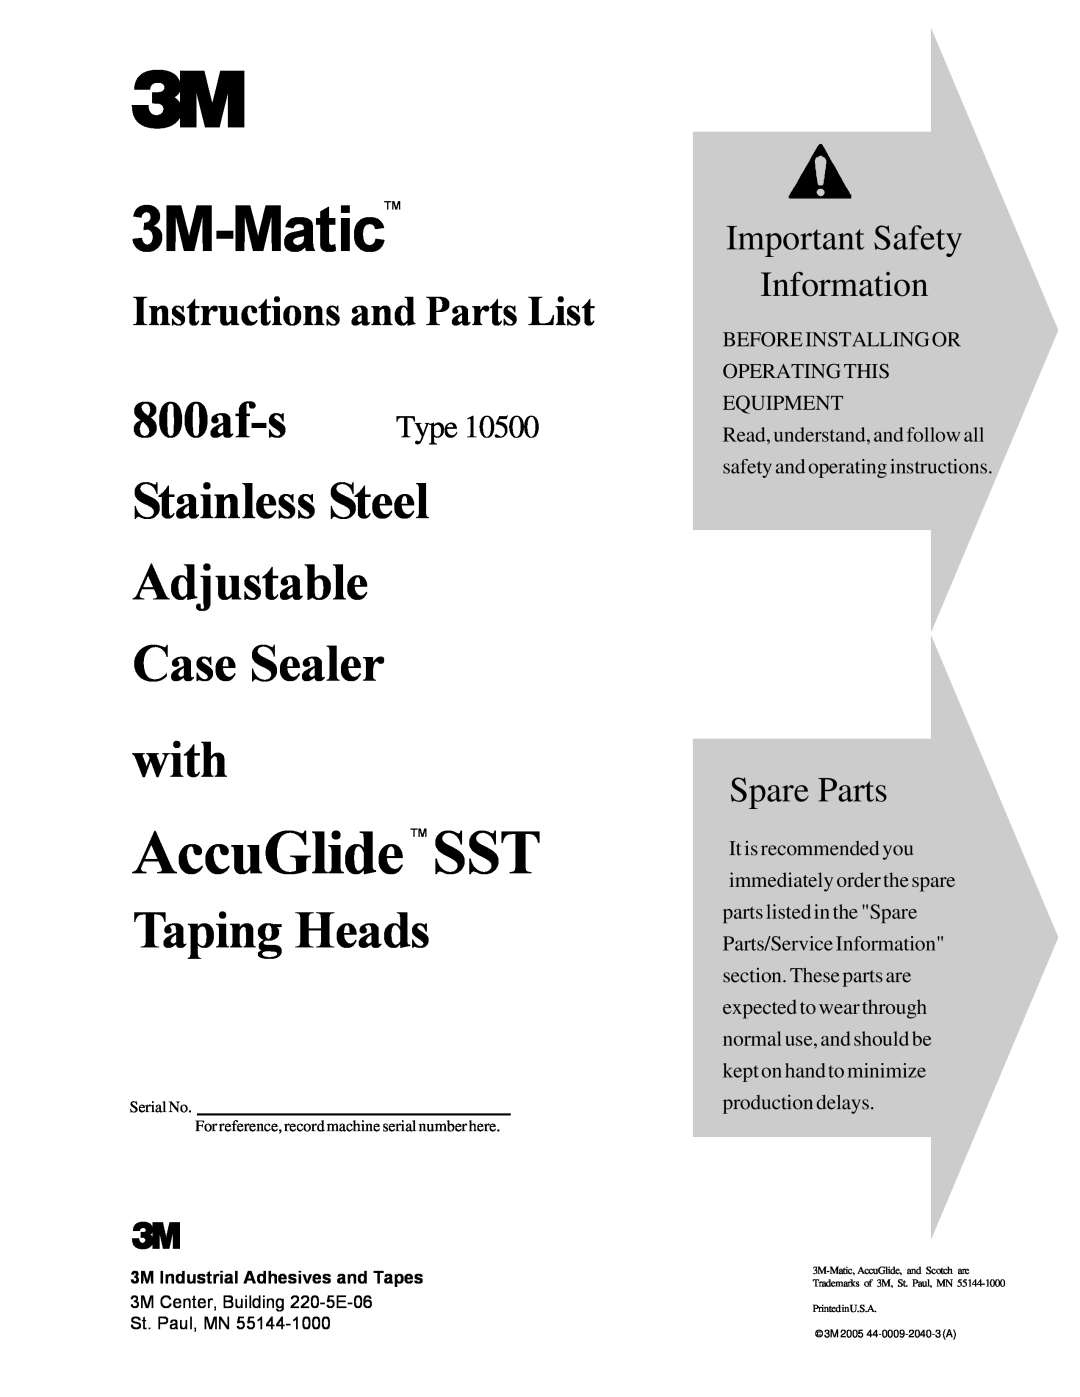 3M 800af-s manual 3M-Matic, AccuGlide SST, Stainless Steel Adjustable Case Sealer with, Taping Heads, Spare Parts 